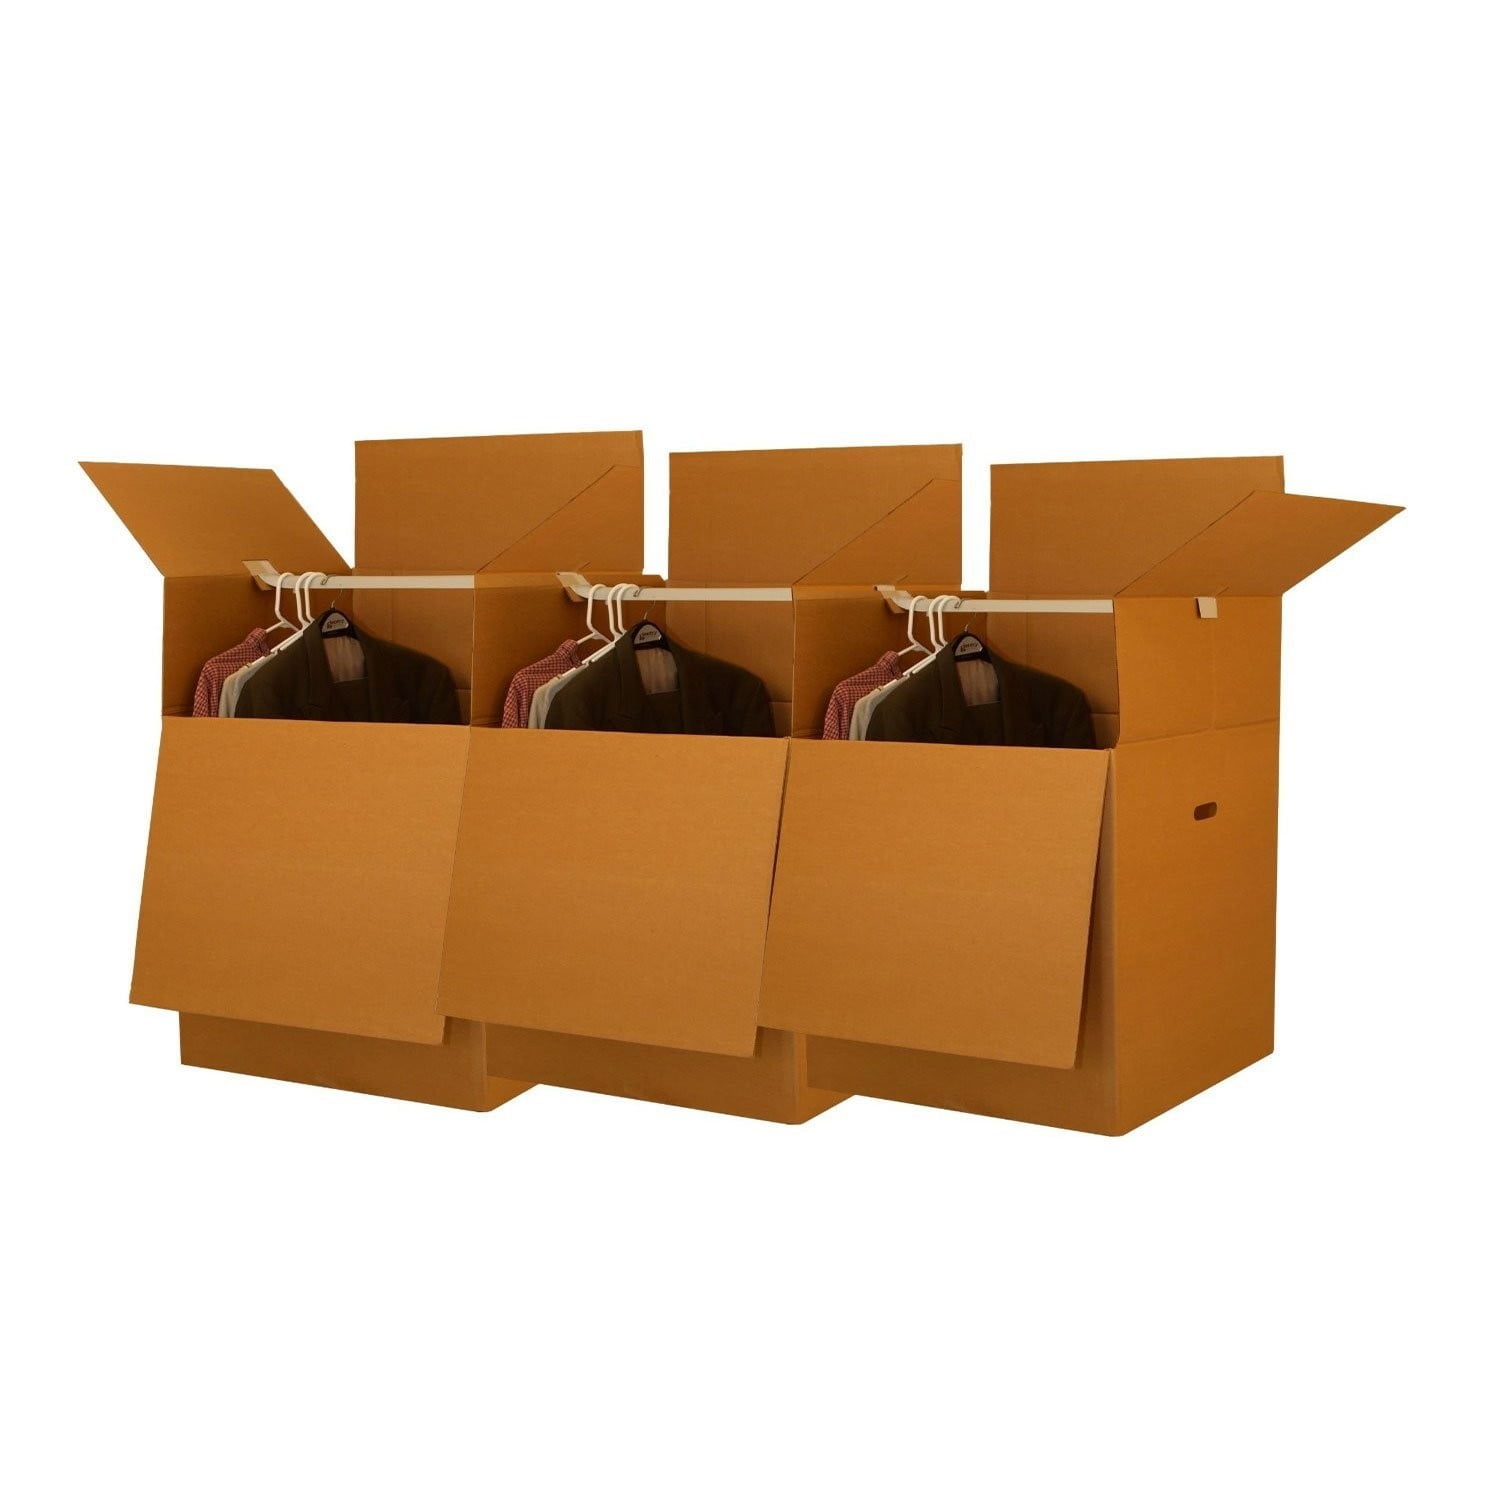 Uboxes 24x24x40 Cubic Feet Moving Boxes - 3 Count for sale online